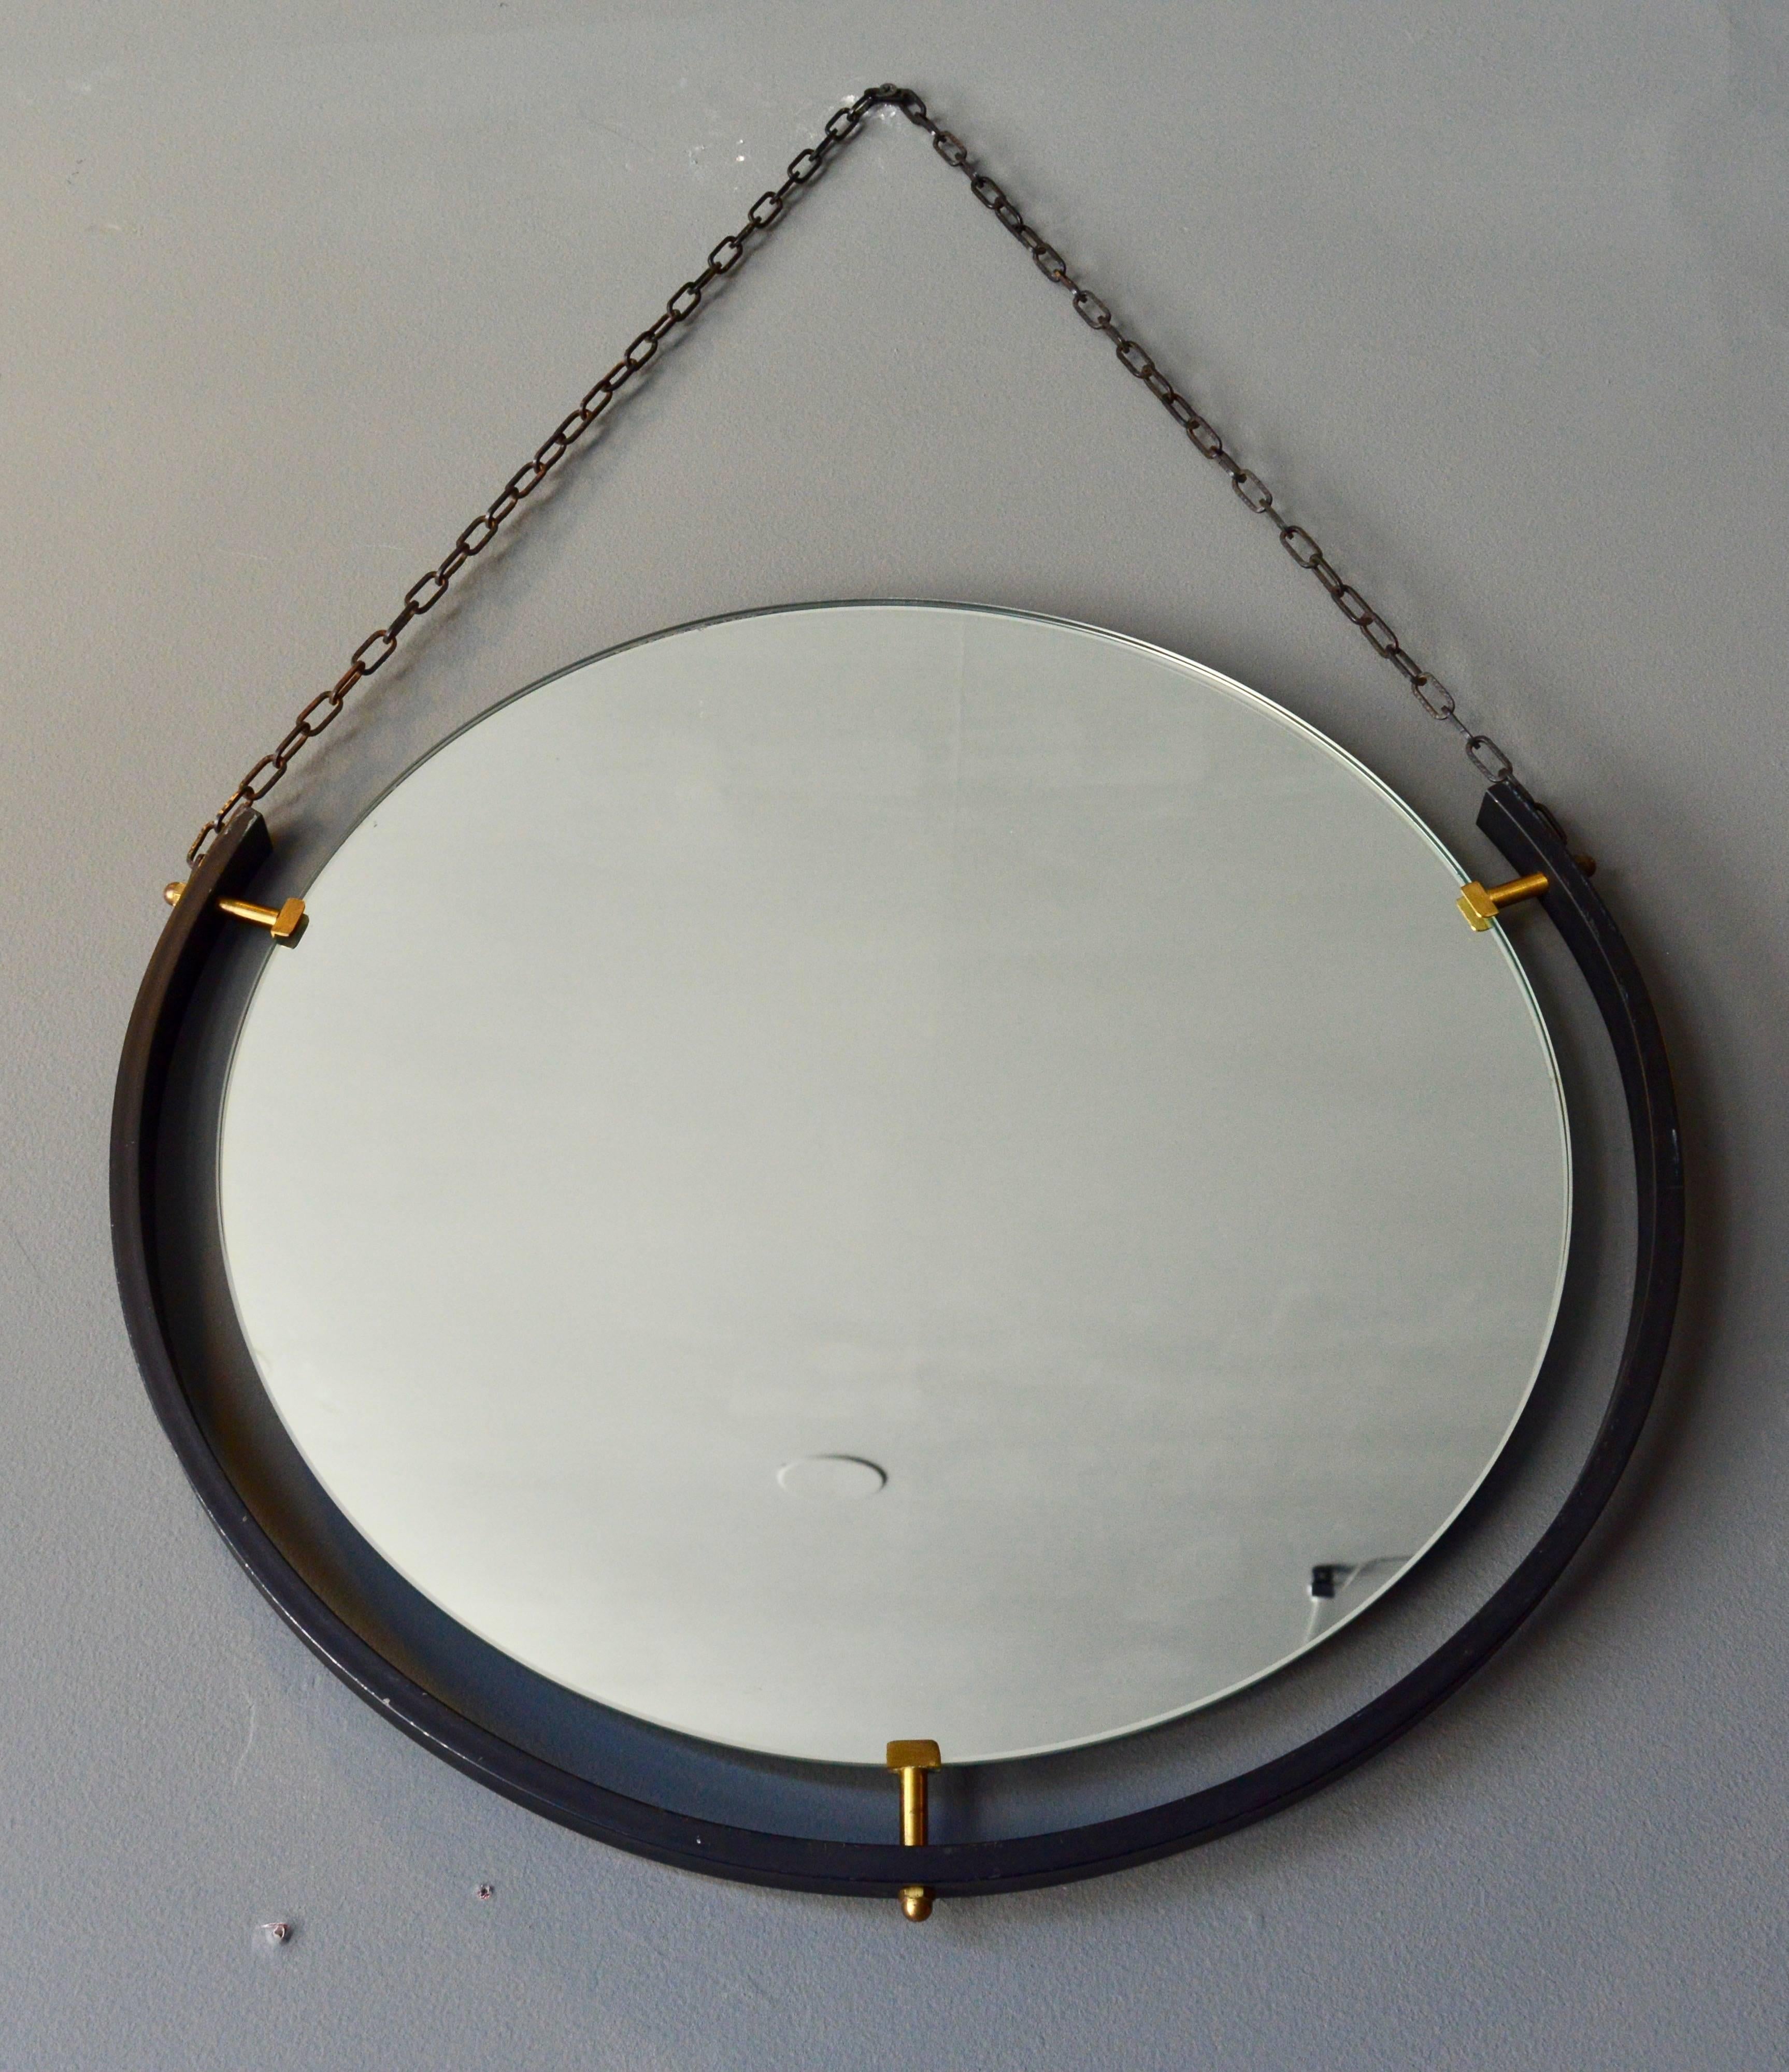 Fantastic set of vintage Italian floating mirrors suspended by metal chain. One mirror has black chain. The second mirror has a brass chain. The third mirror has a rope chain. Easy to switch out the chain/rope to match. Great sculptural piece.